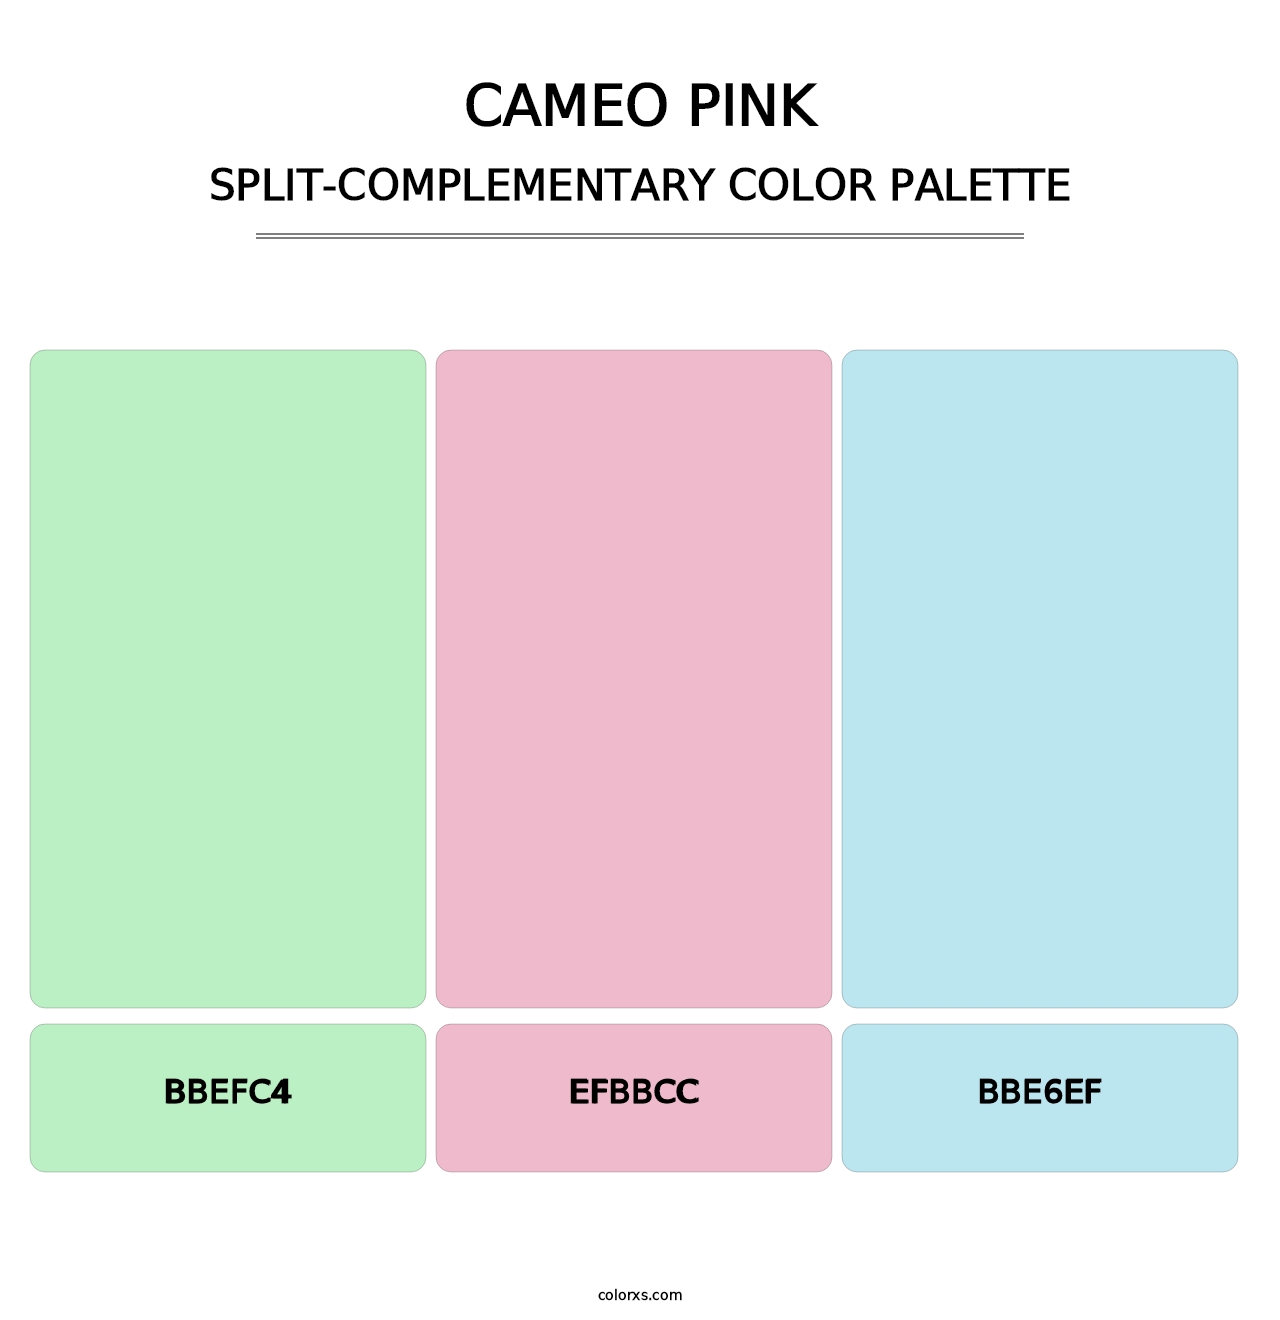 Cameo Pink - Split-Complementary Color Palette